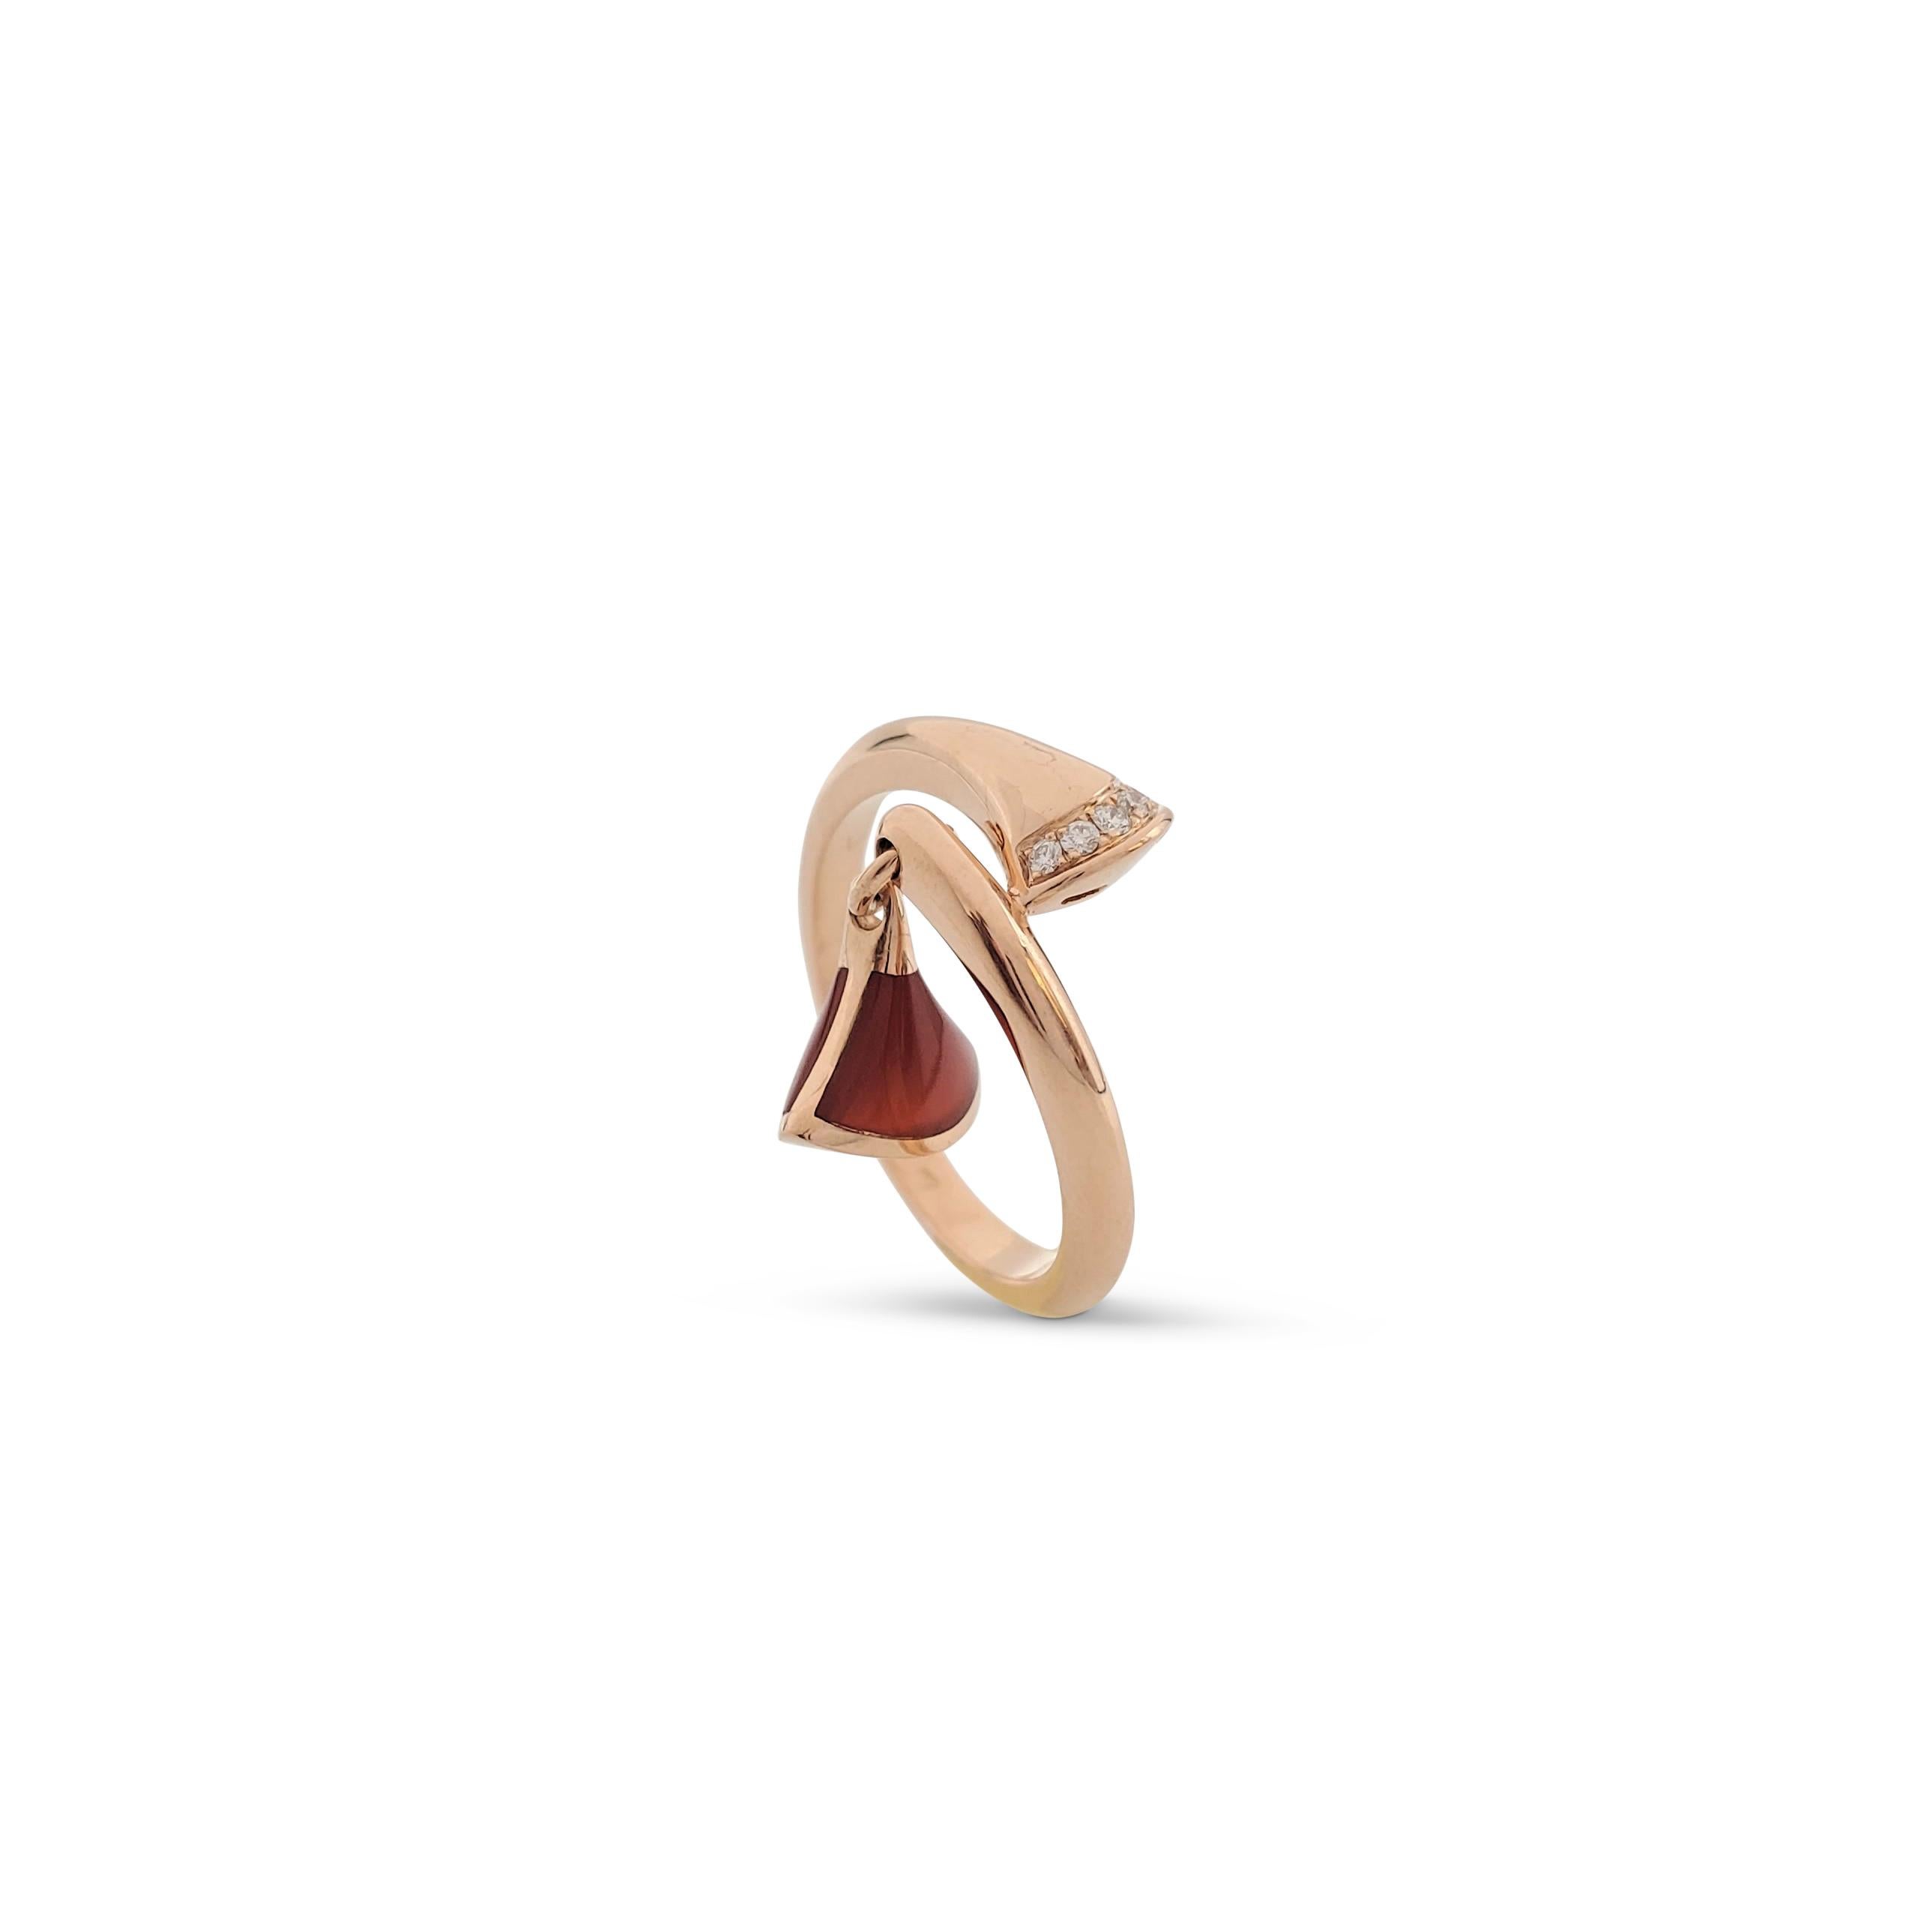 Authentic Bvlgari ring from the 'Divas' Dream' collection is crafted in 18 karat rose gold. The ring is set with an estimated 0.05 carats of round brilliant cut diamonds and features a fan-shaped carnelian charm. Signed Bvlgari, Au750, Made in